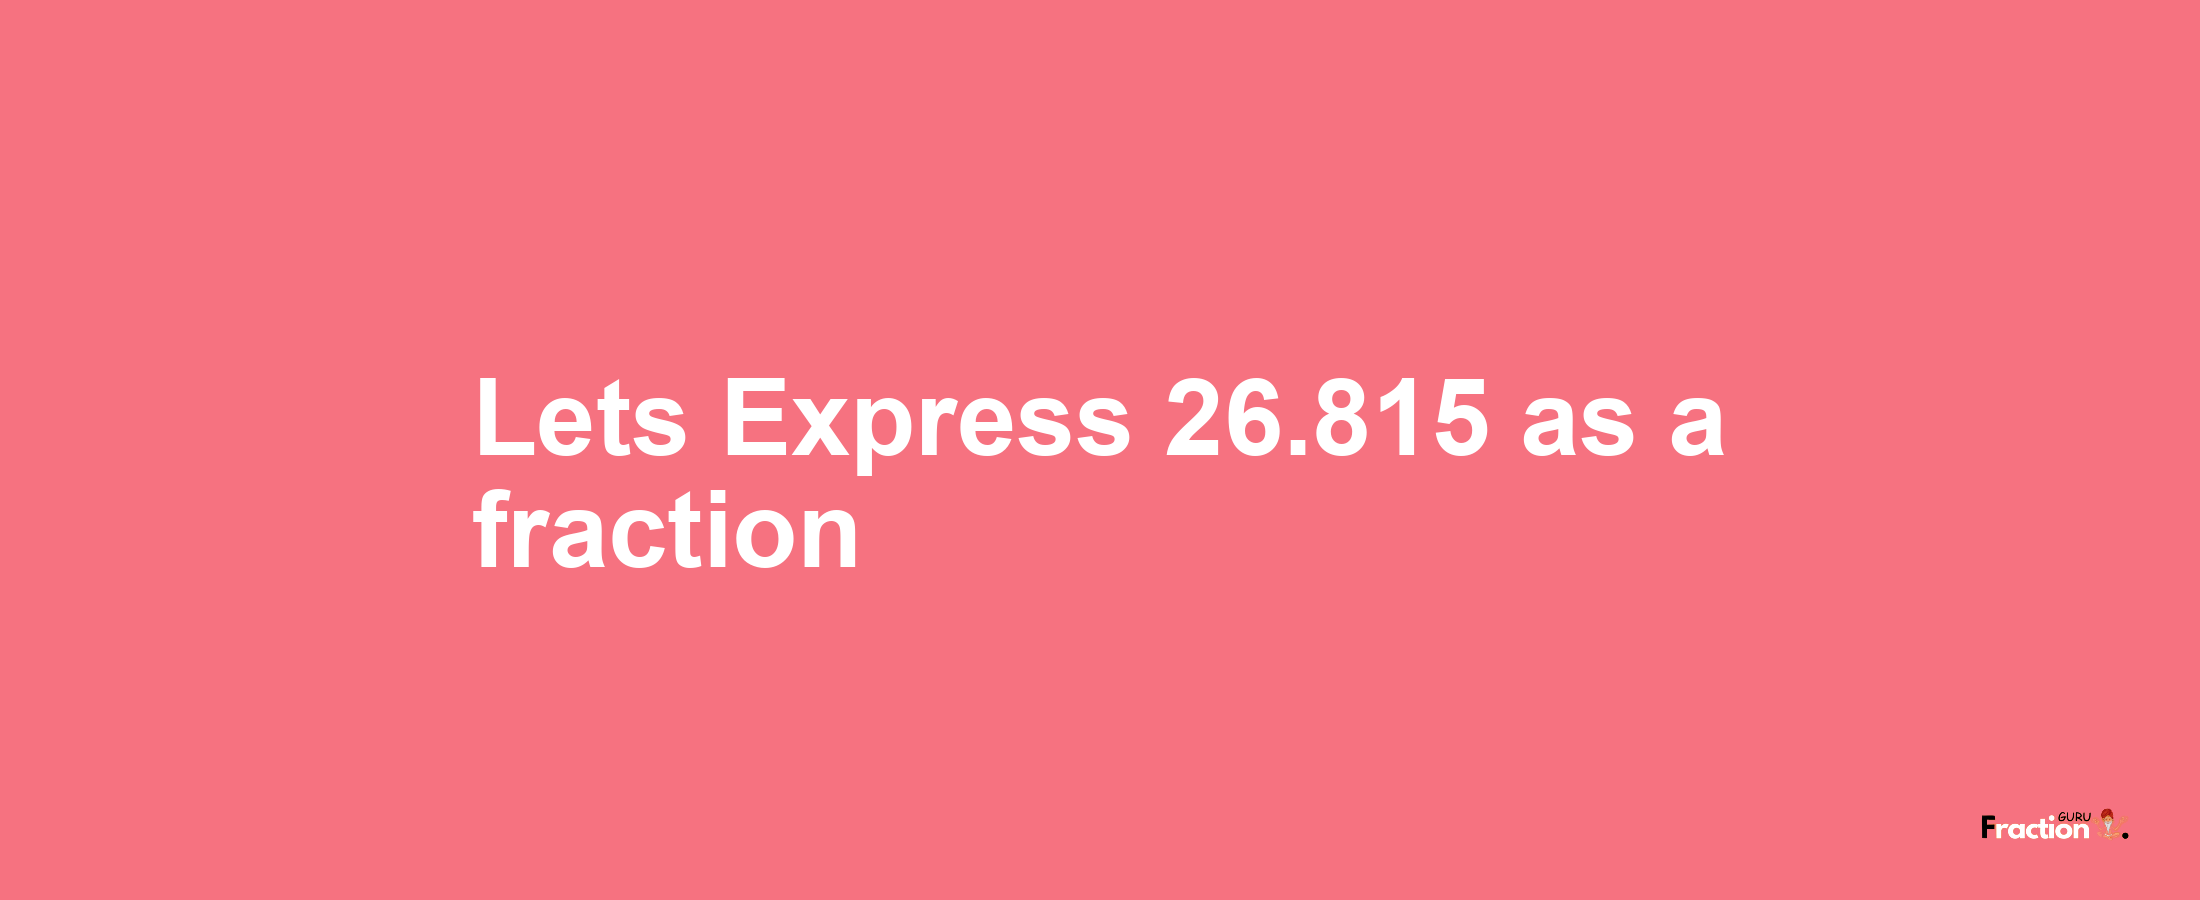 Lets Express 26.815 as afraction